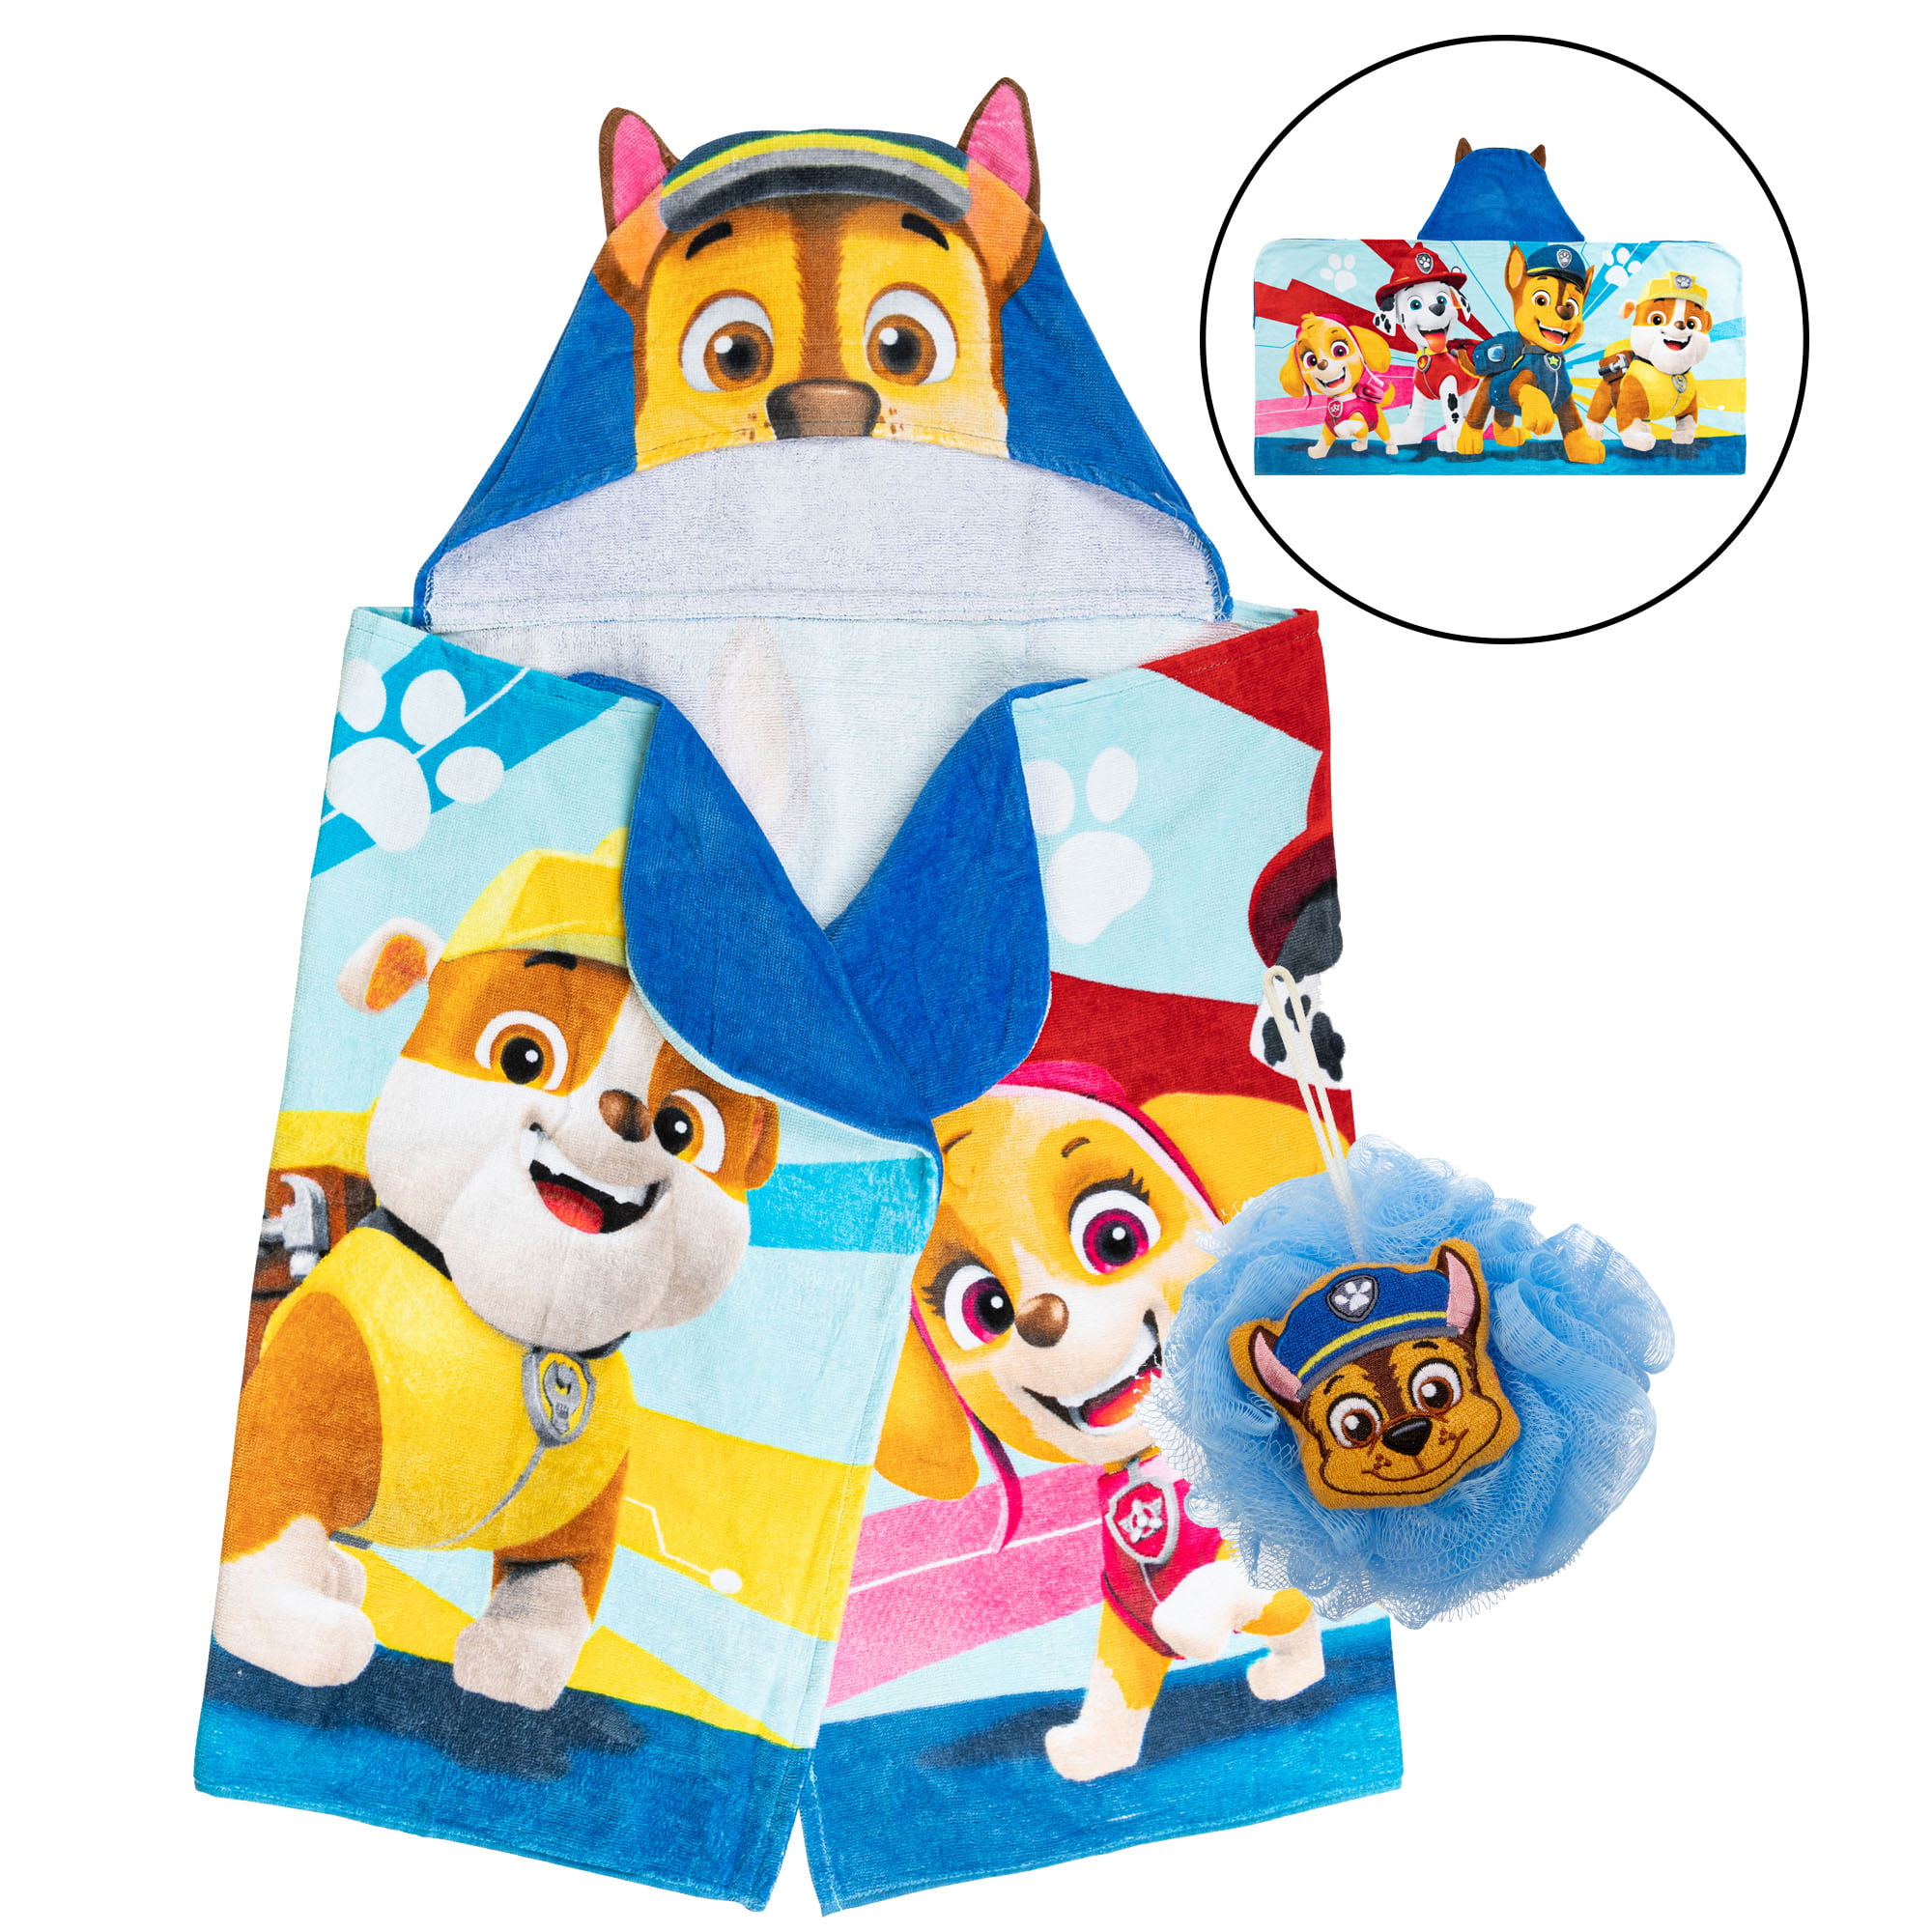 Blue Marshall Character Perfect for Bath and Beach Marshall Paw Patrol Nickelodeon Official Licensed Boys Hooded 100% Cotton Poncho Towel 